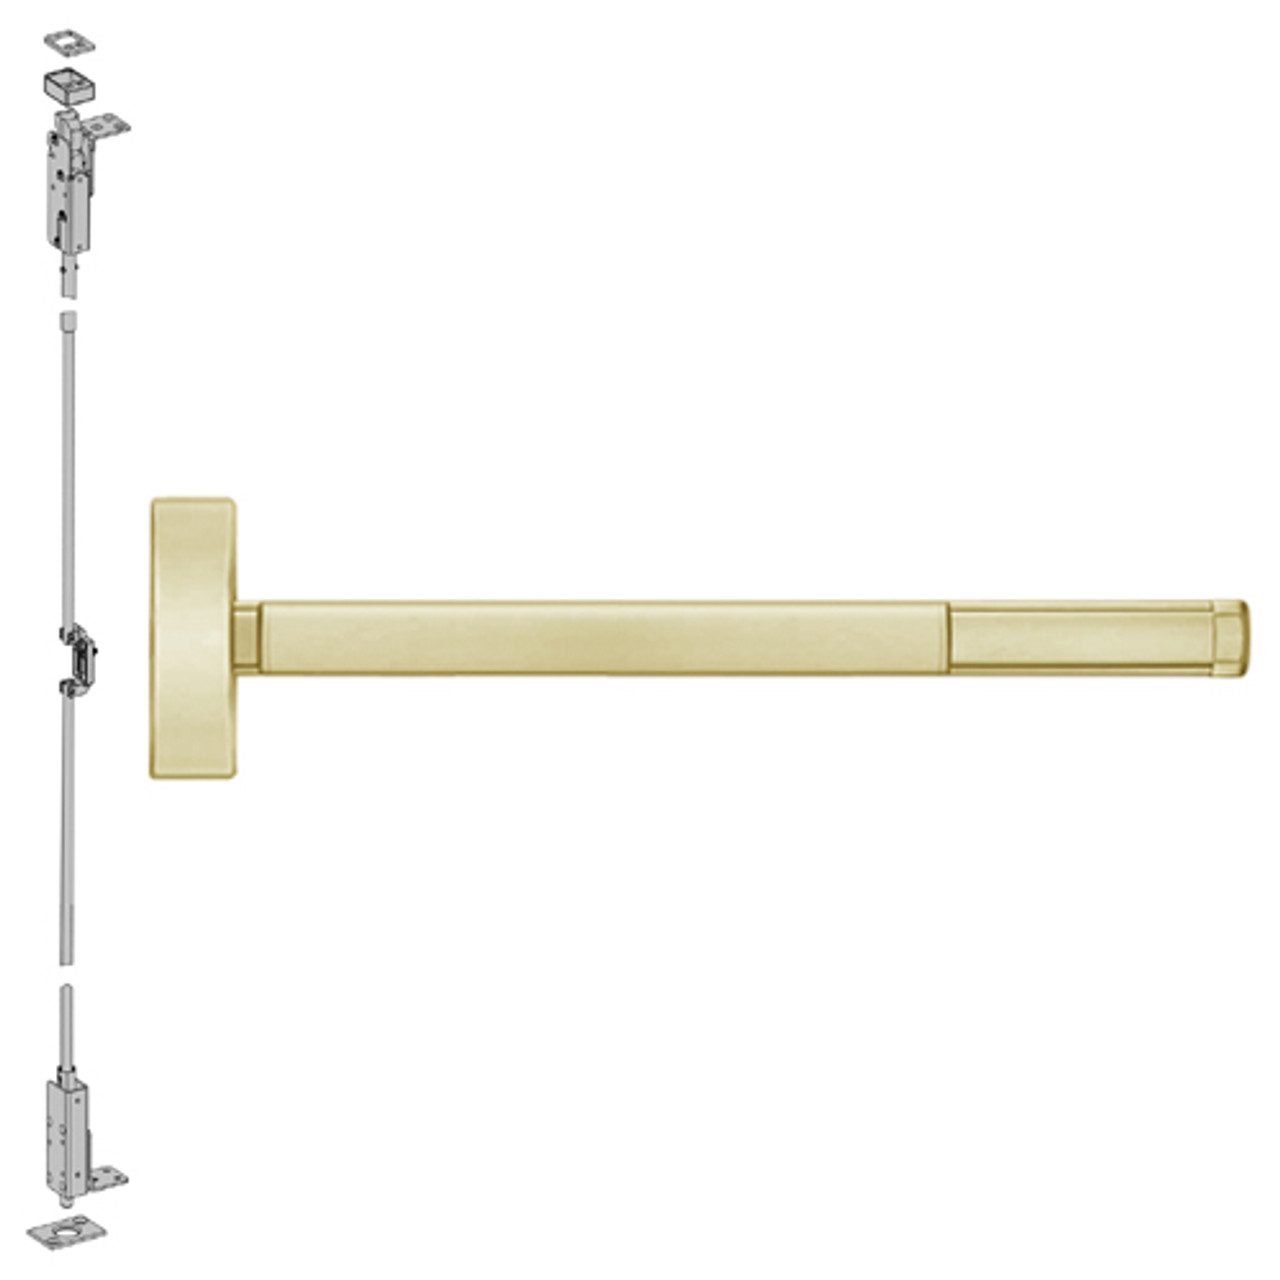 ELRFL2715-606-48 PHI 2700 Series Wood Door Concealed Vertical Exit Device with Electric Latch Retraction Prepped for Thumbpiece Always Active in Satin Brass Finish